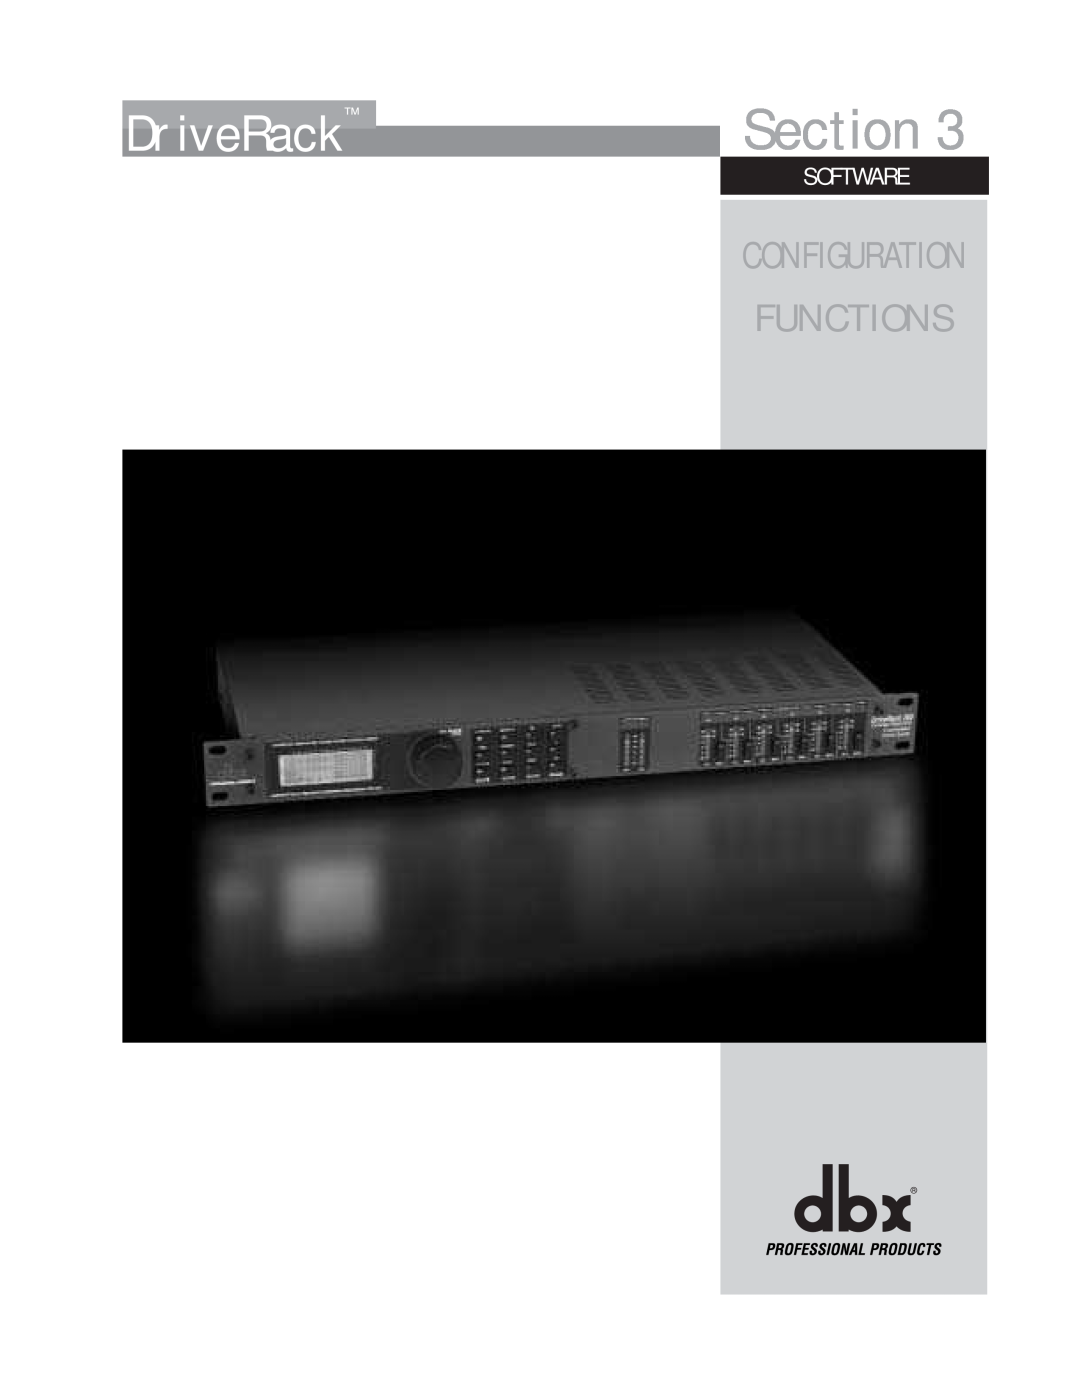 dbx Pro 260 user manual DriveRack, Section, Functions, Configuration, Software 